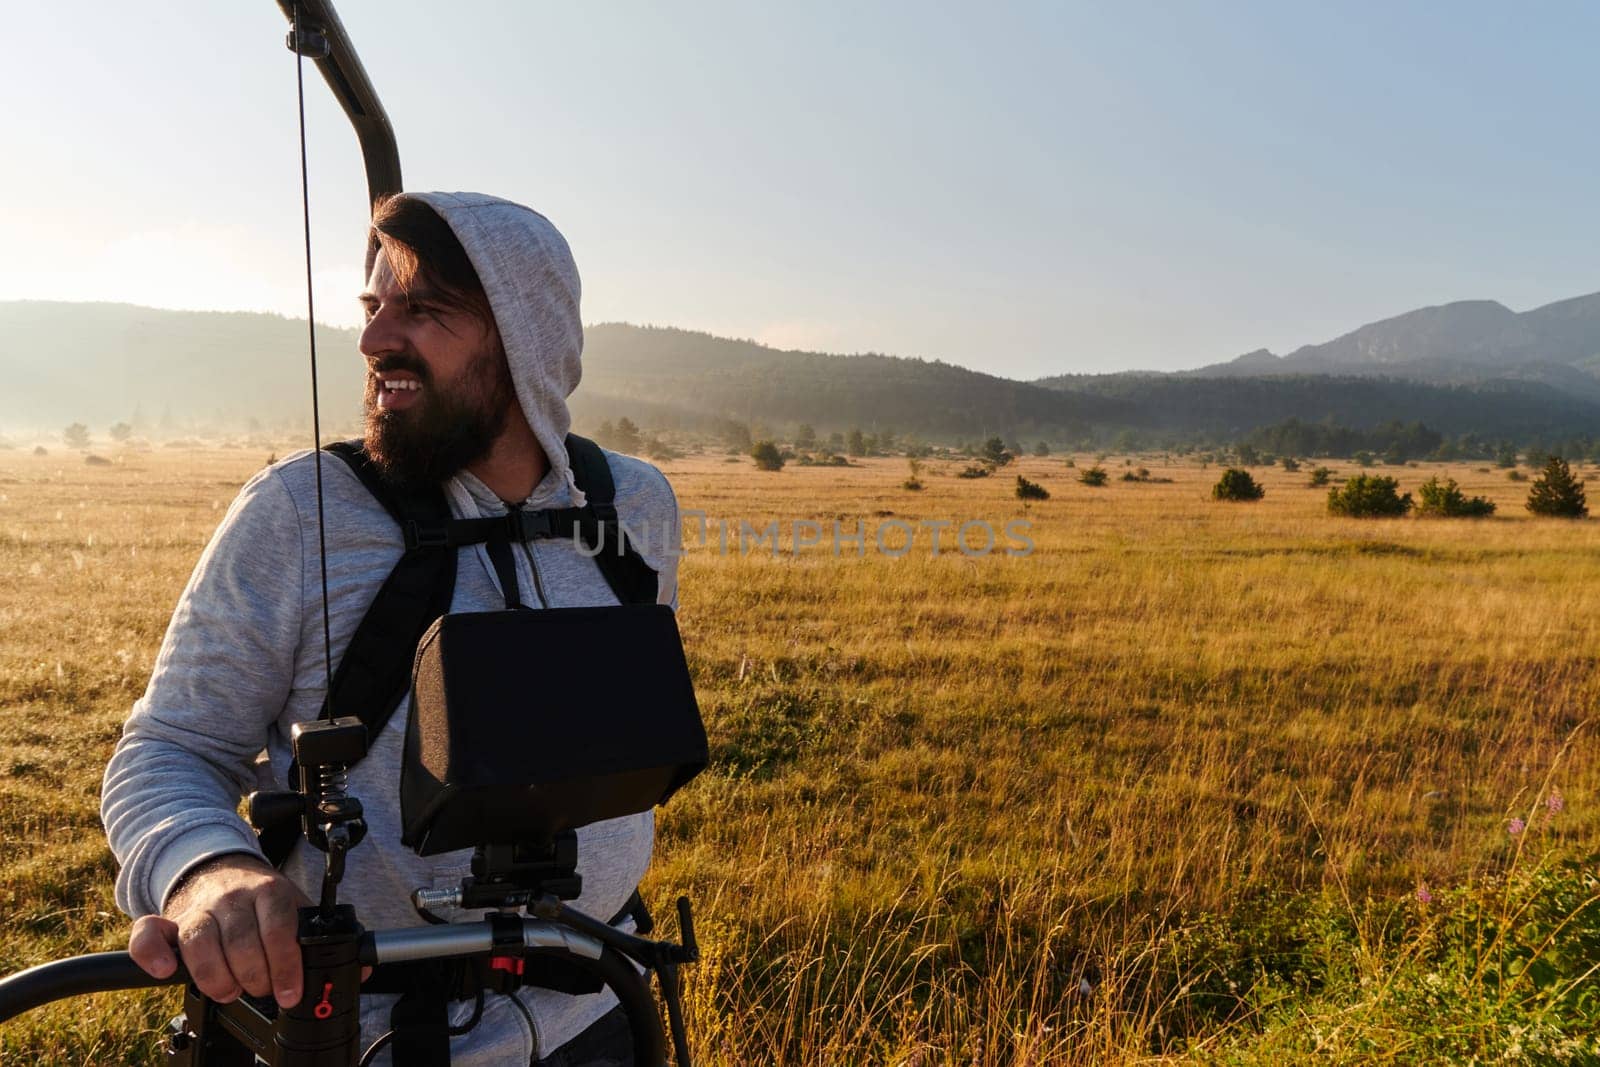 Misty Morning Capture: Videographer Ready to Film Beautiful Meadow Scenes. by dotshock